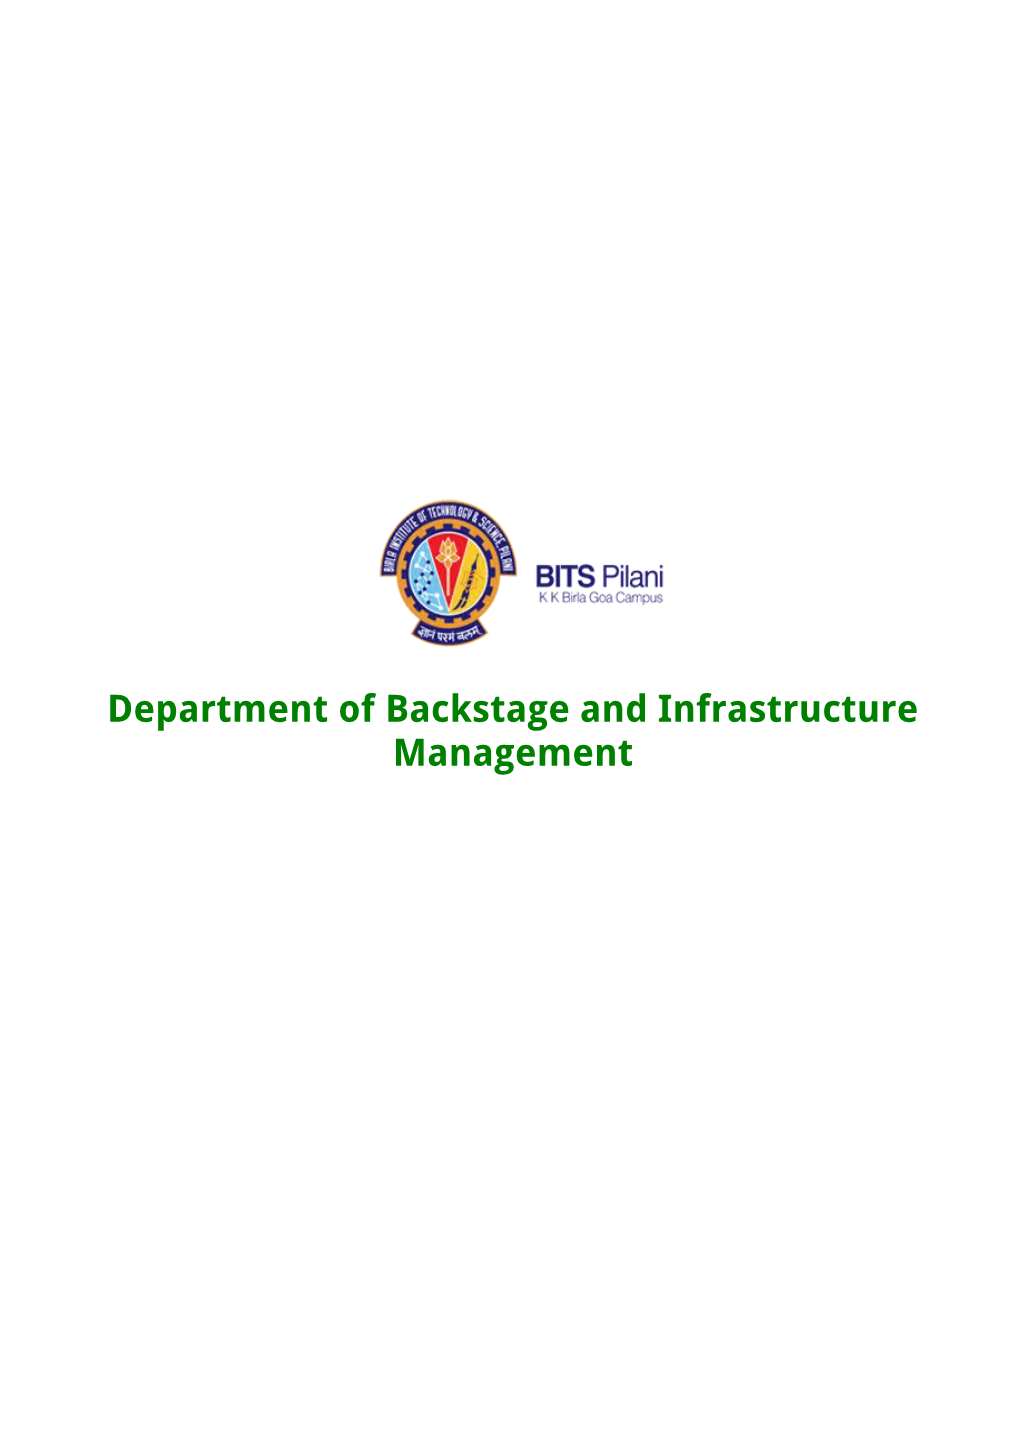 Department of Backstage and Infrastructure Management Introduction to Transmission Cables